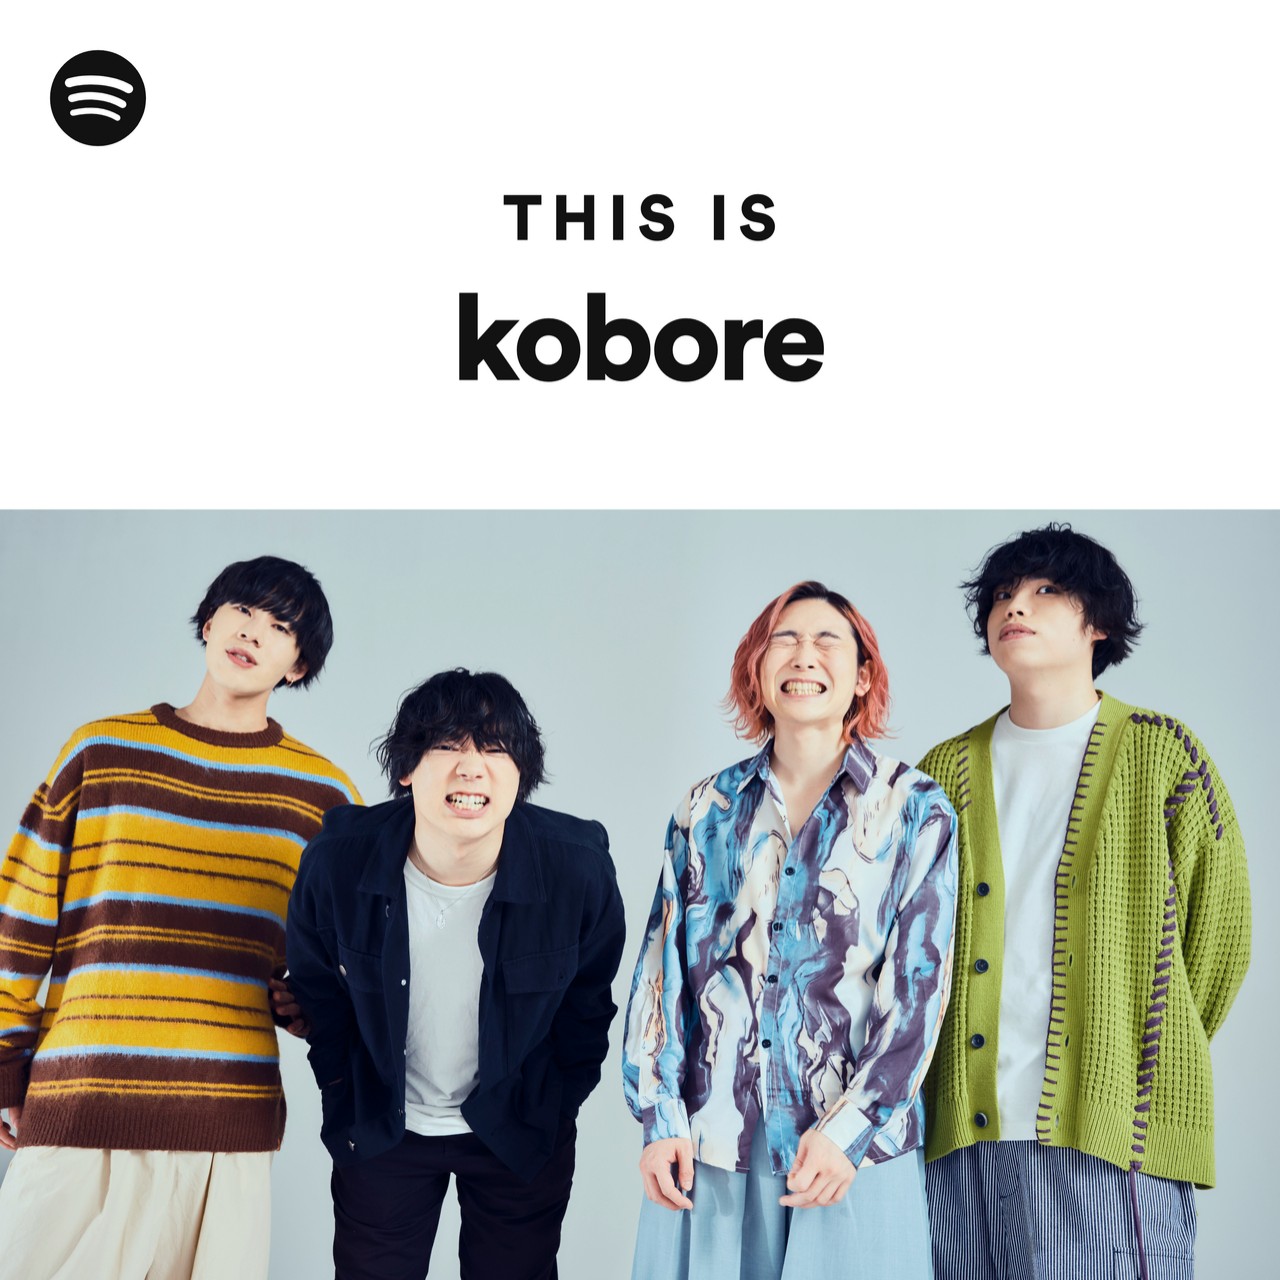 This Is kobore | Spotify Playlist